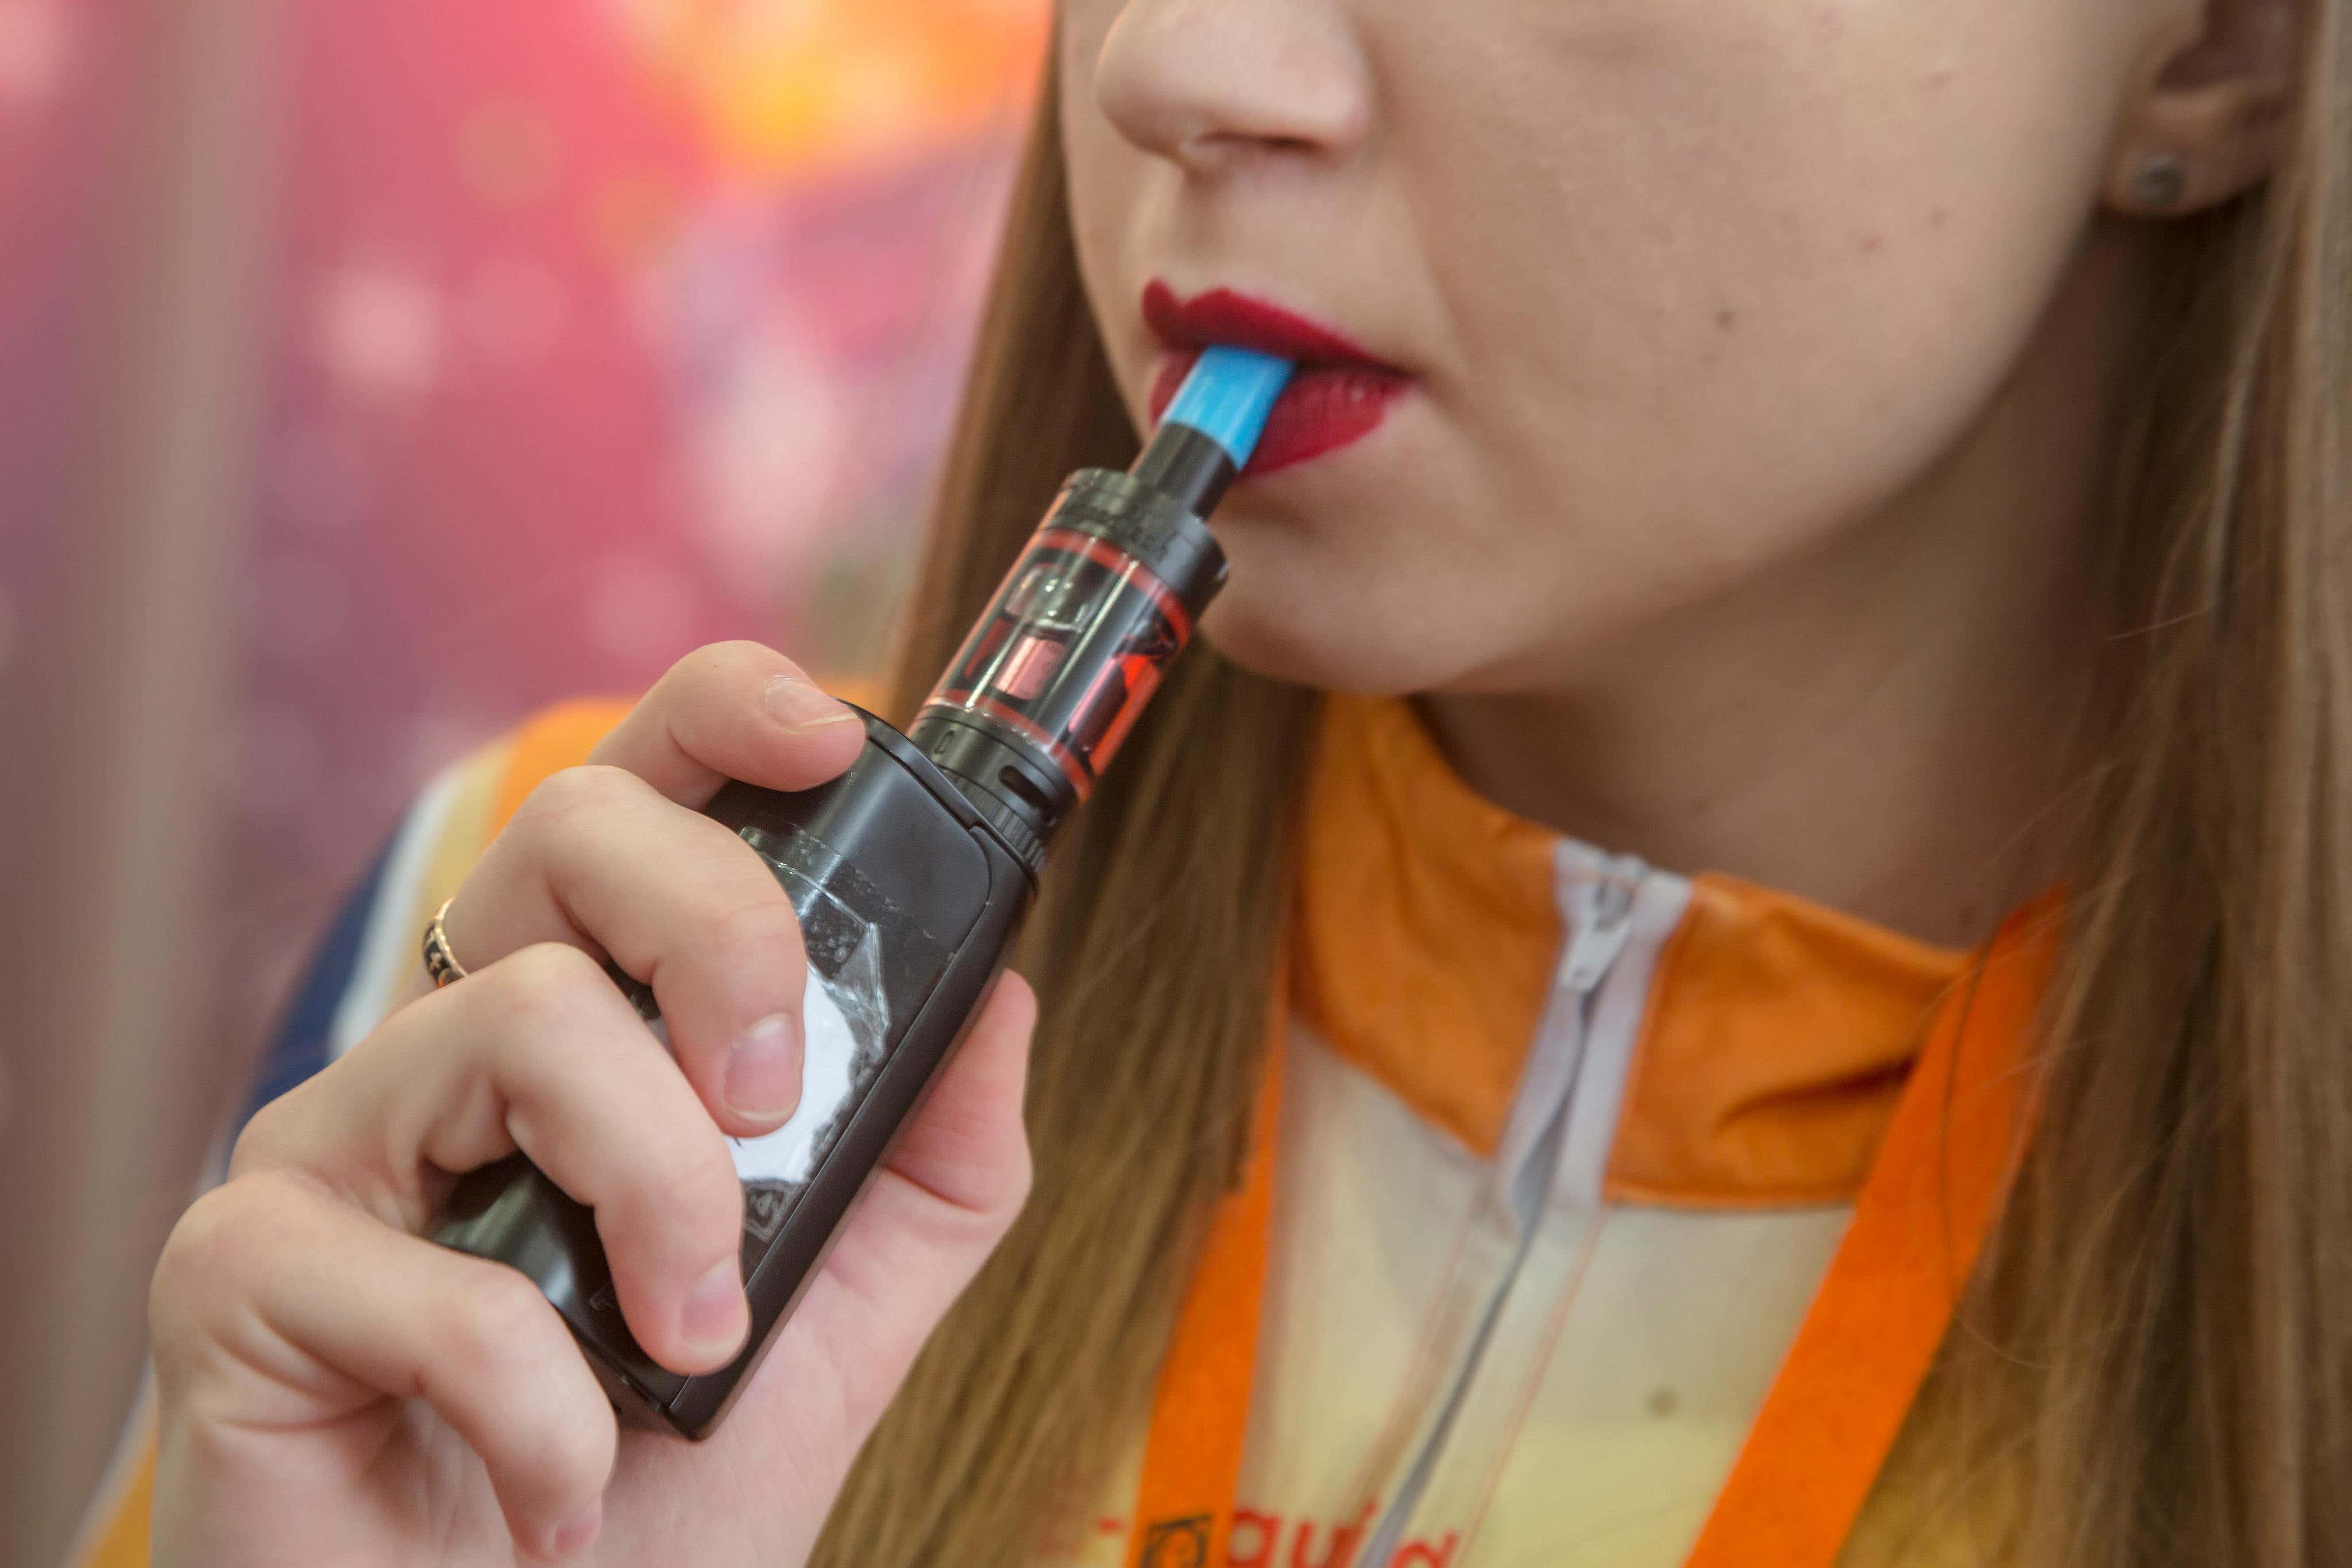 Researchers said that the rise in higher-strength vapes coincides with the growing popularity of disposable vapes